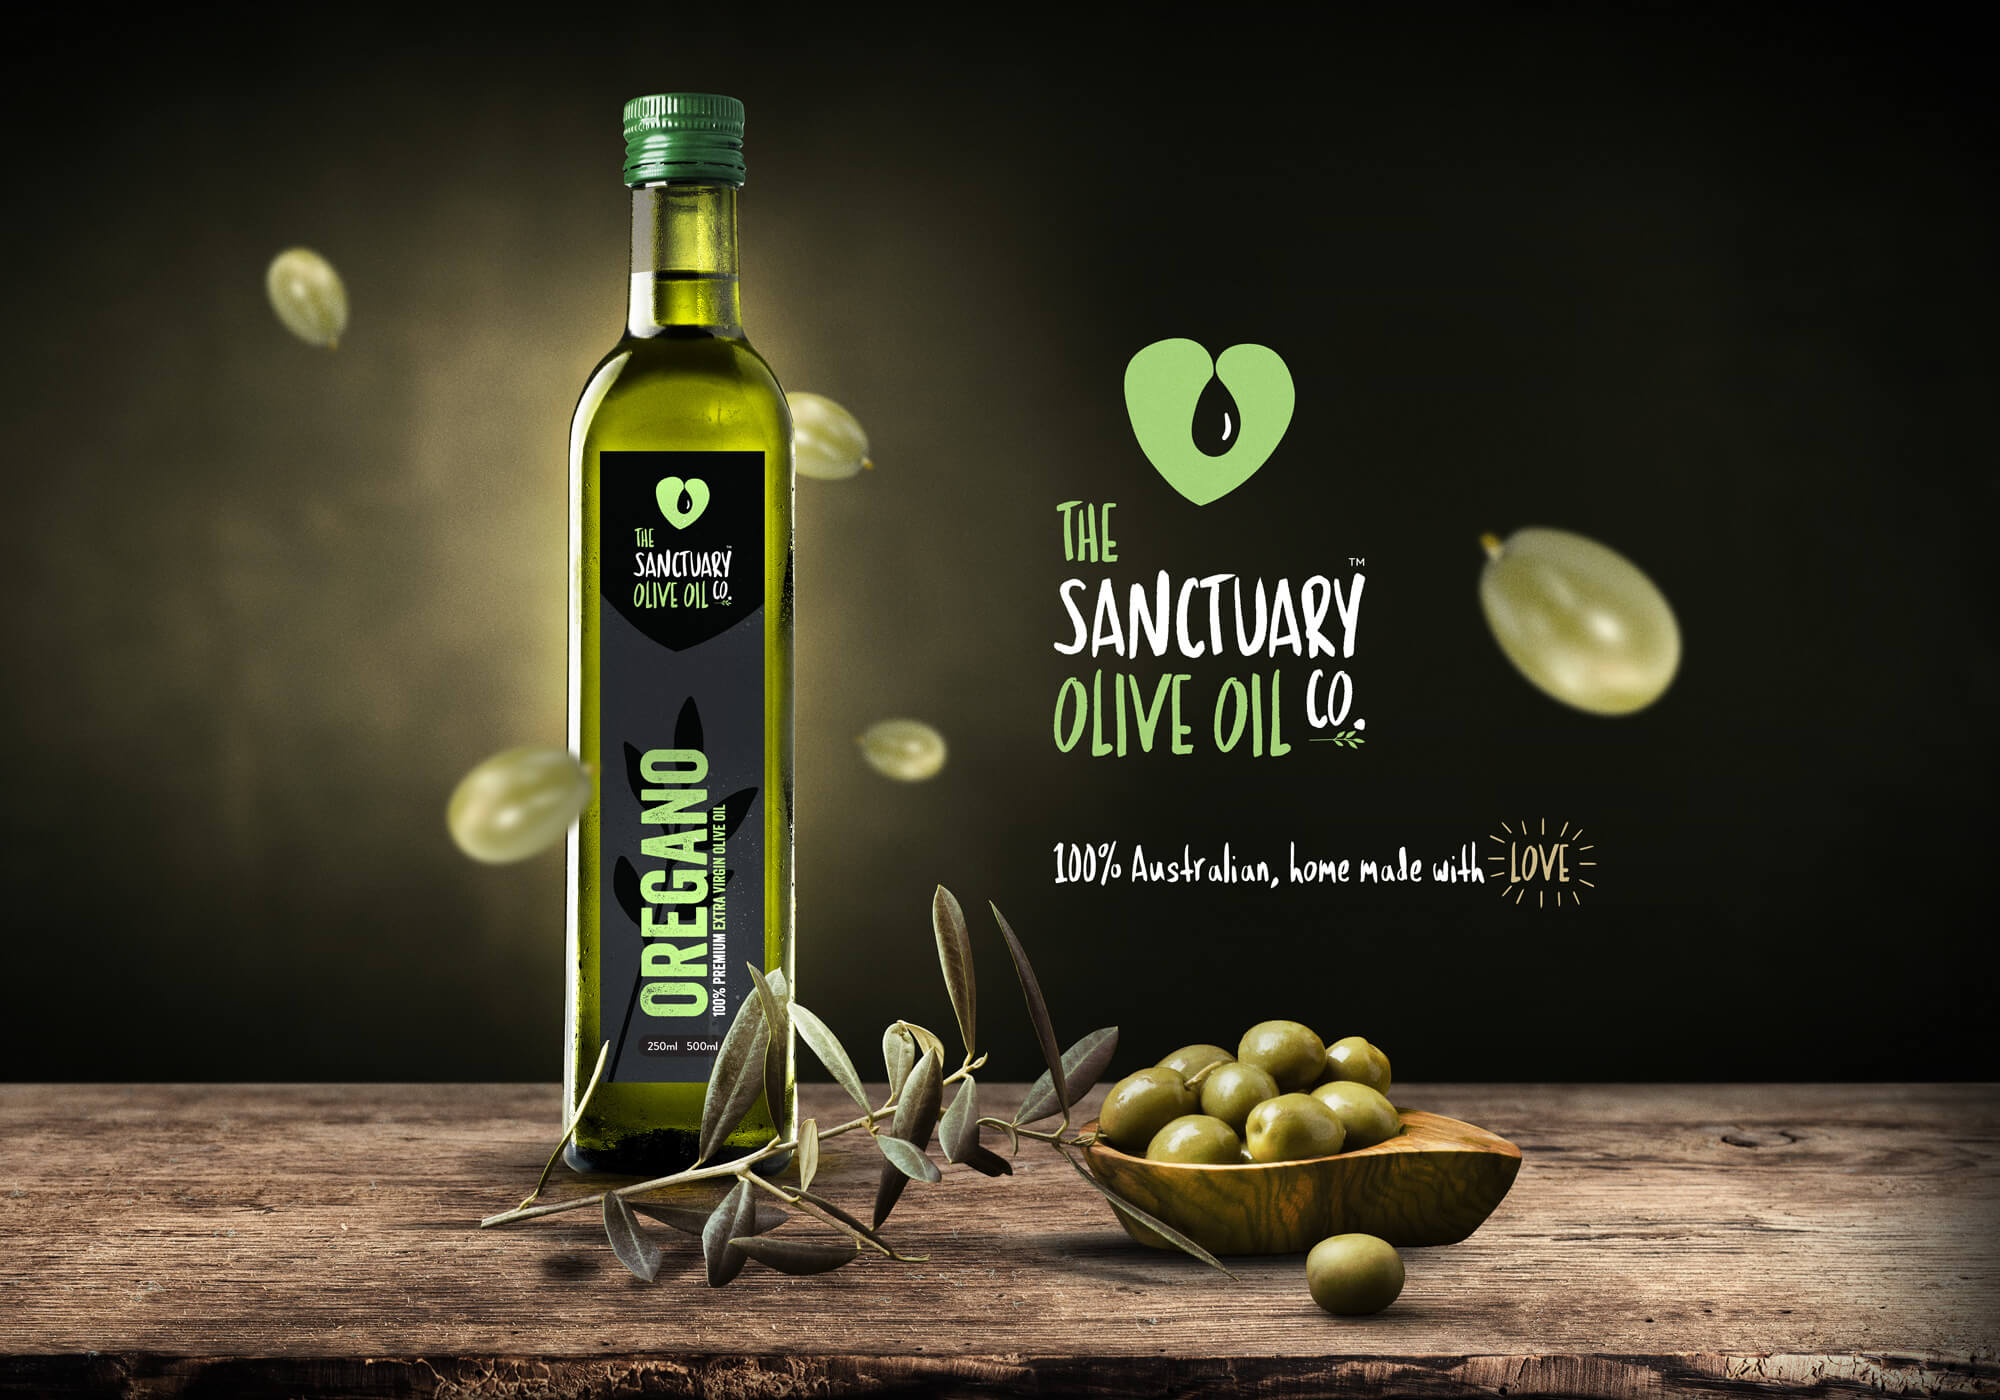 The Sanctuary Olive Oil Co. by KidDotCo